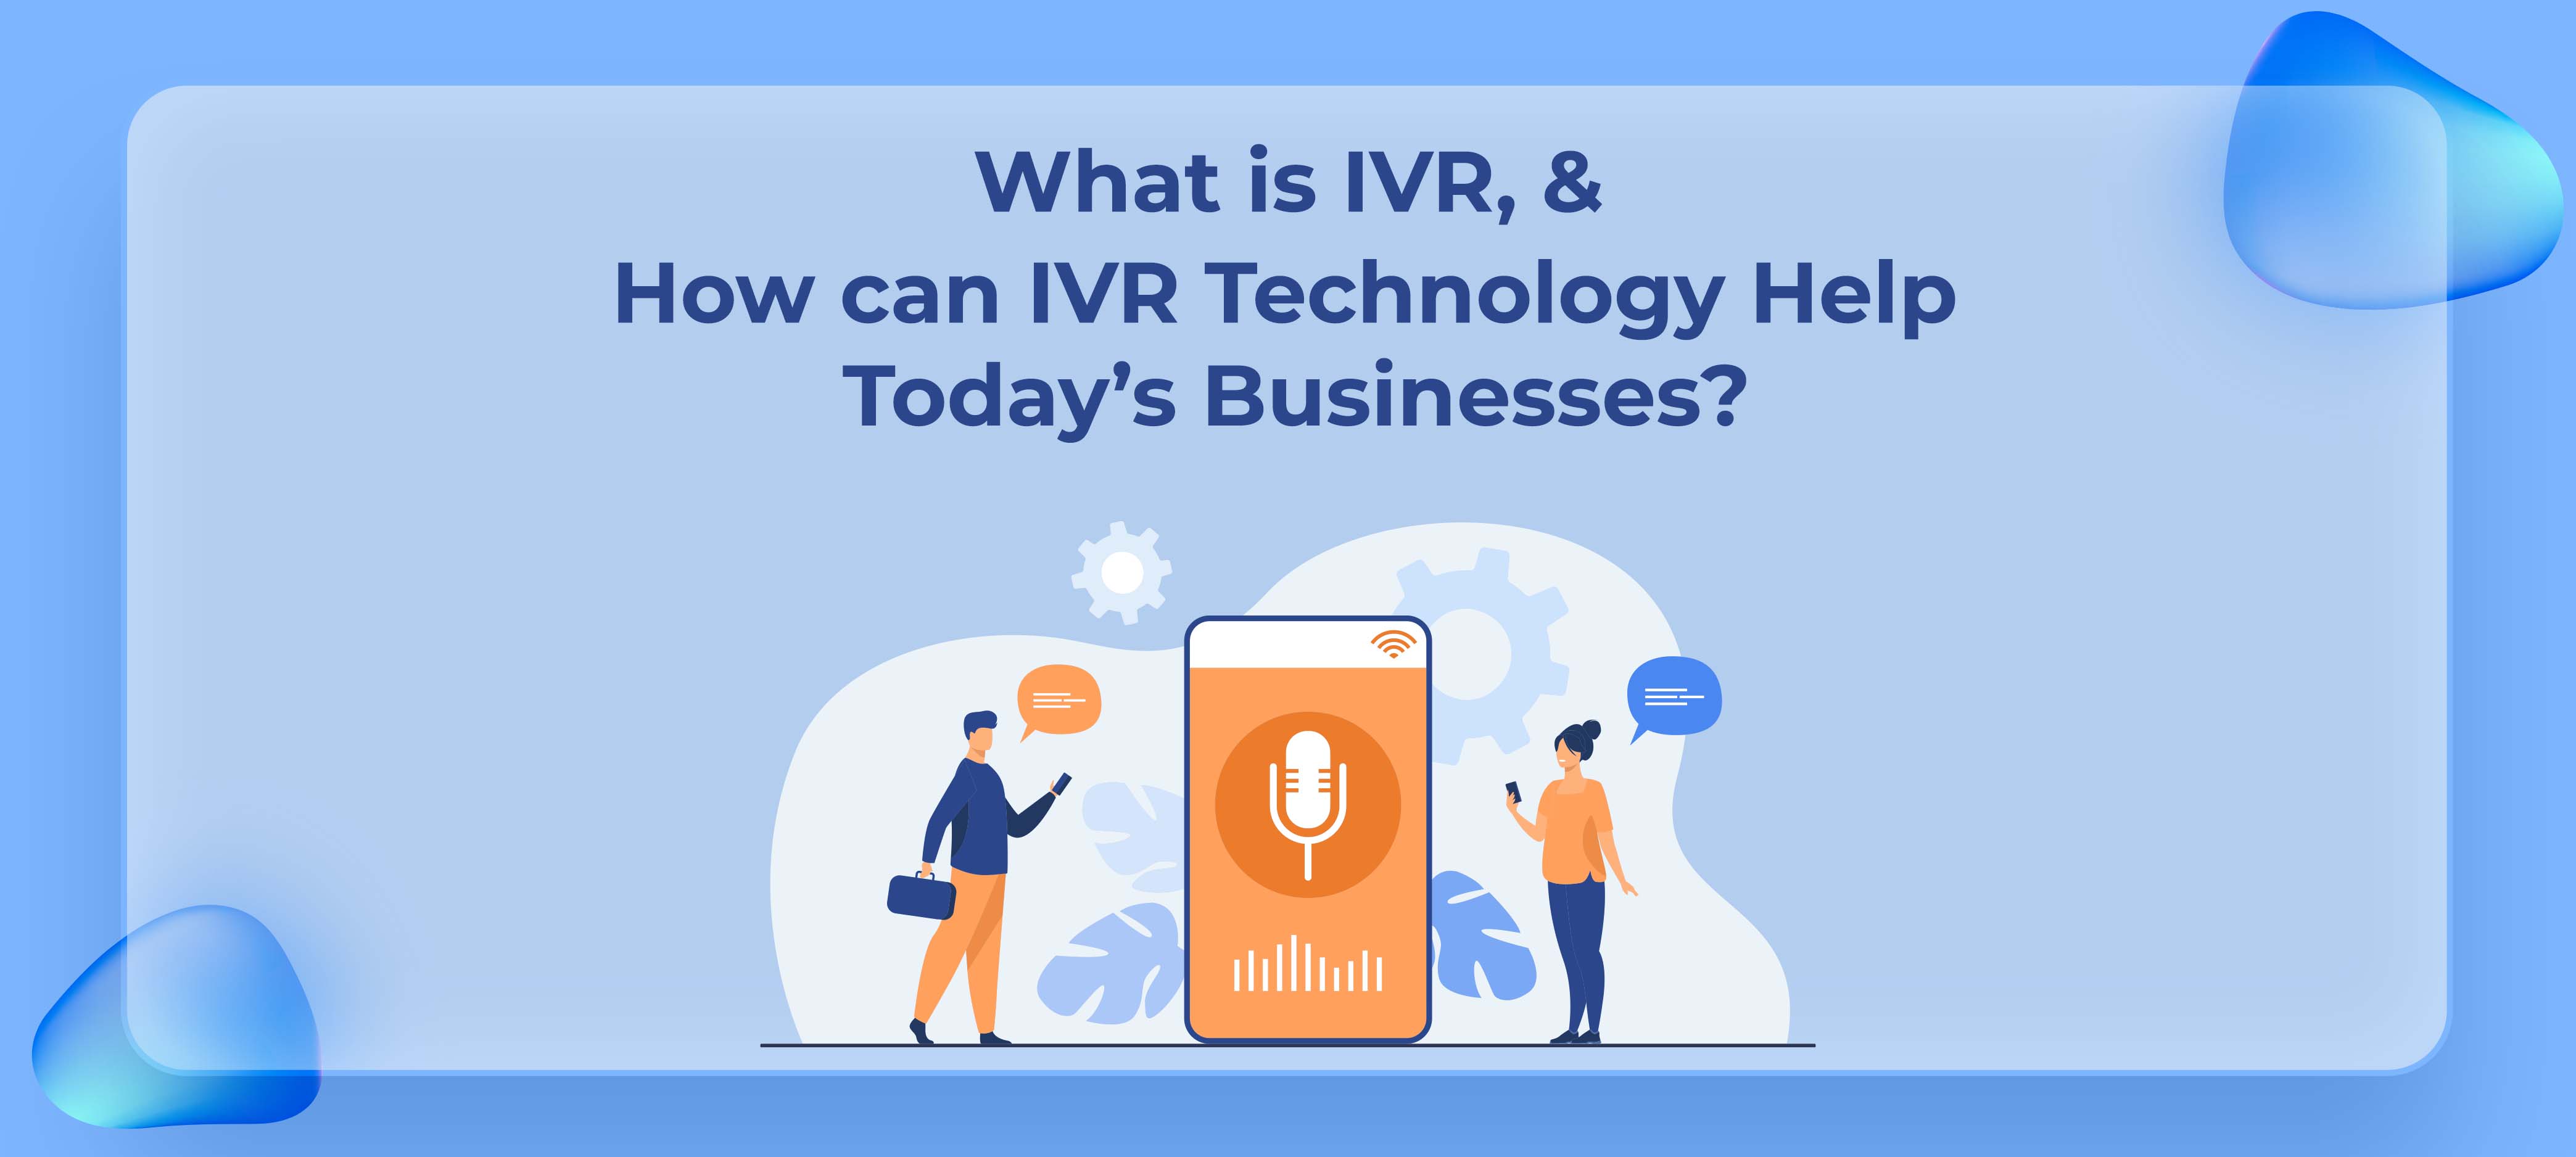 You are currently viewing What is IVR, and How can IVR Technology Help Today’s Businesses?